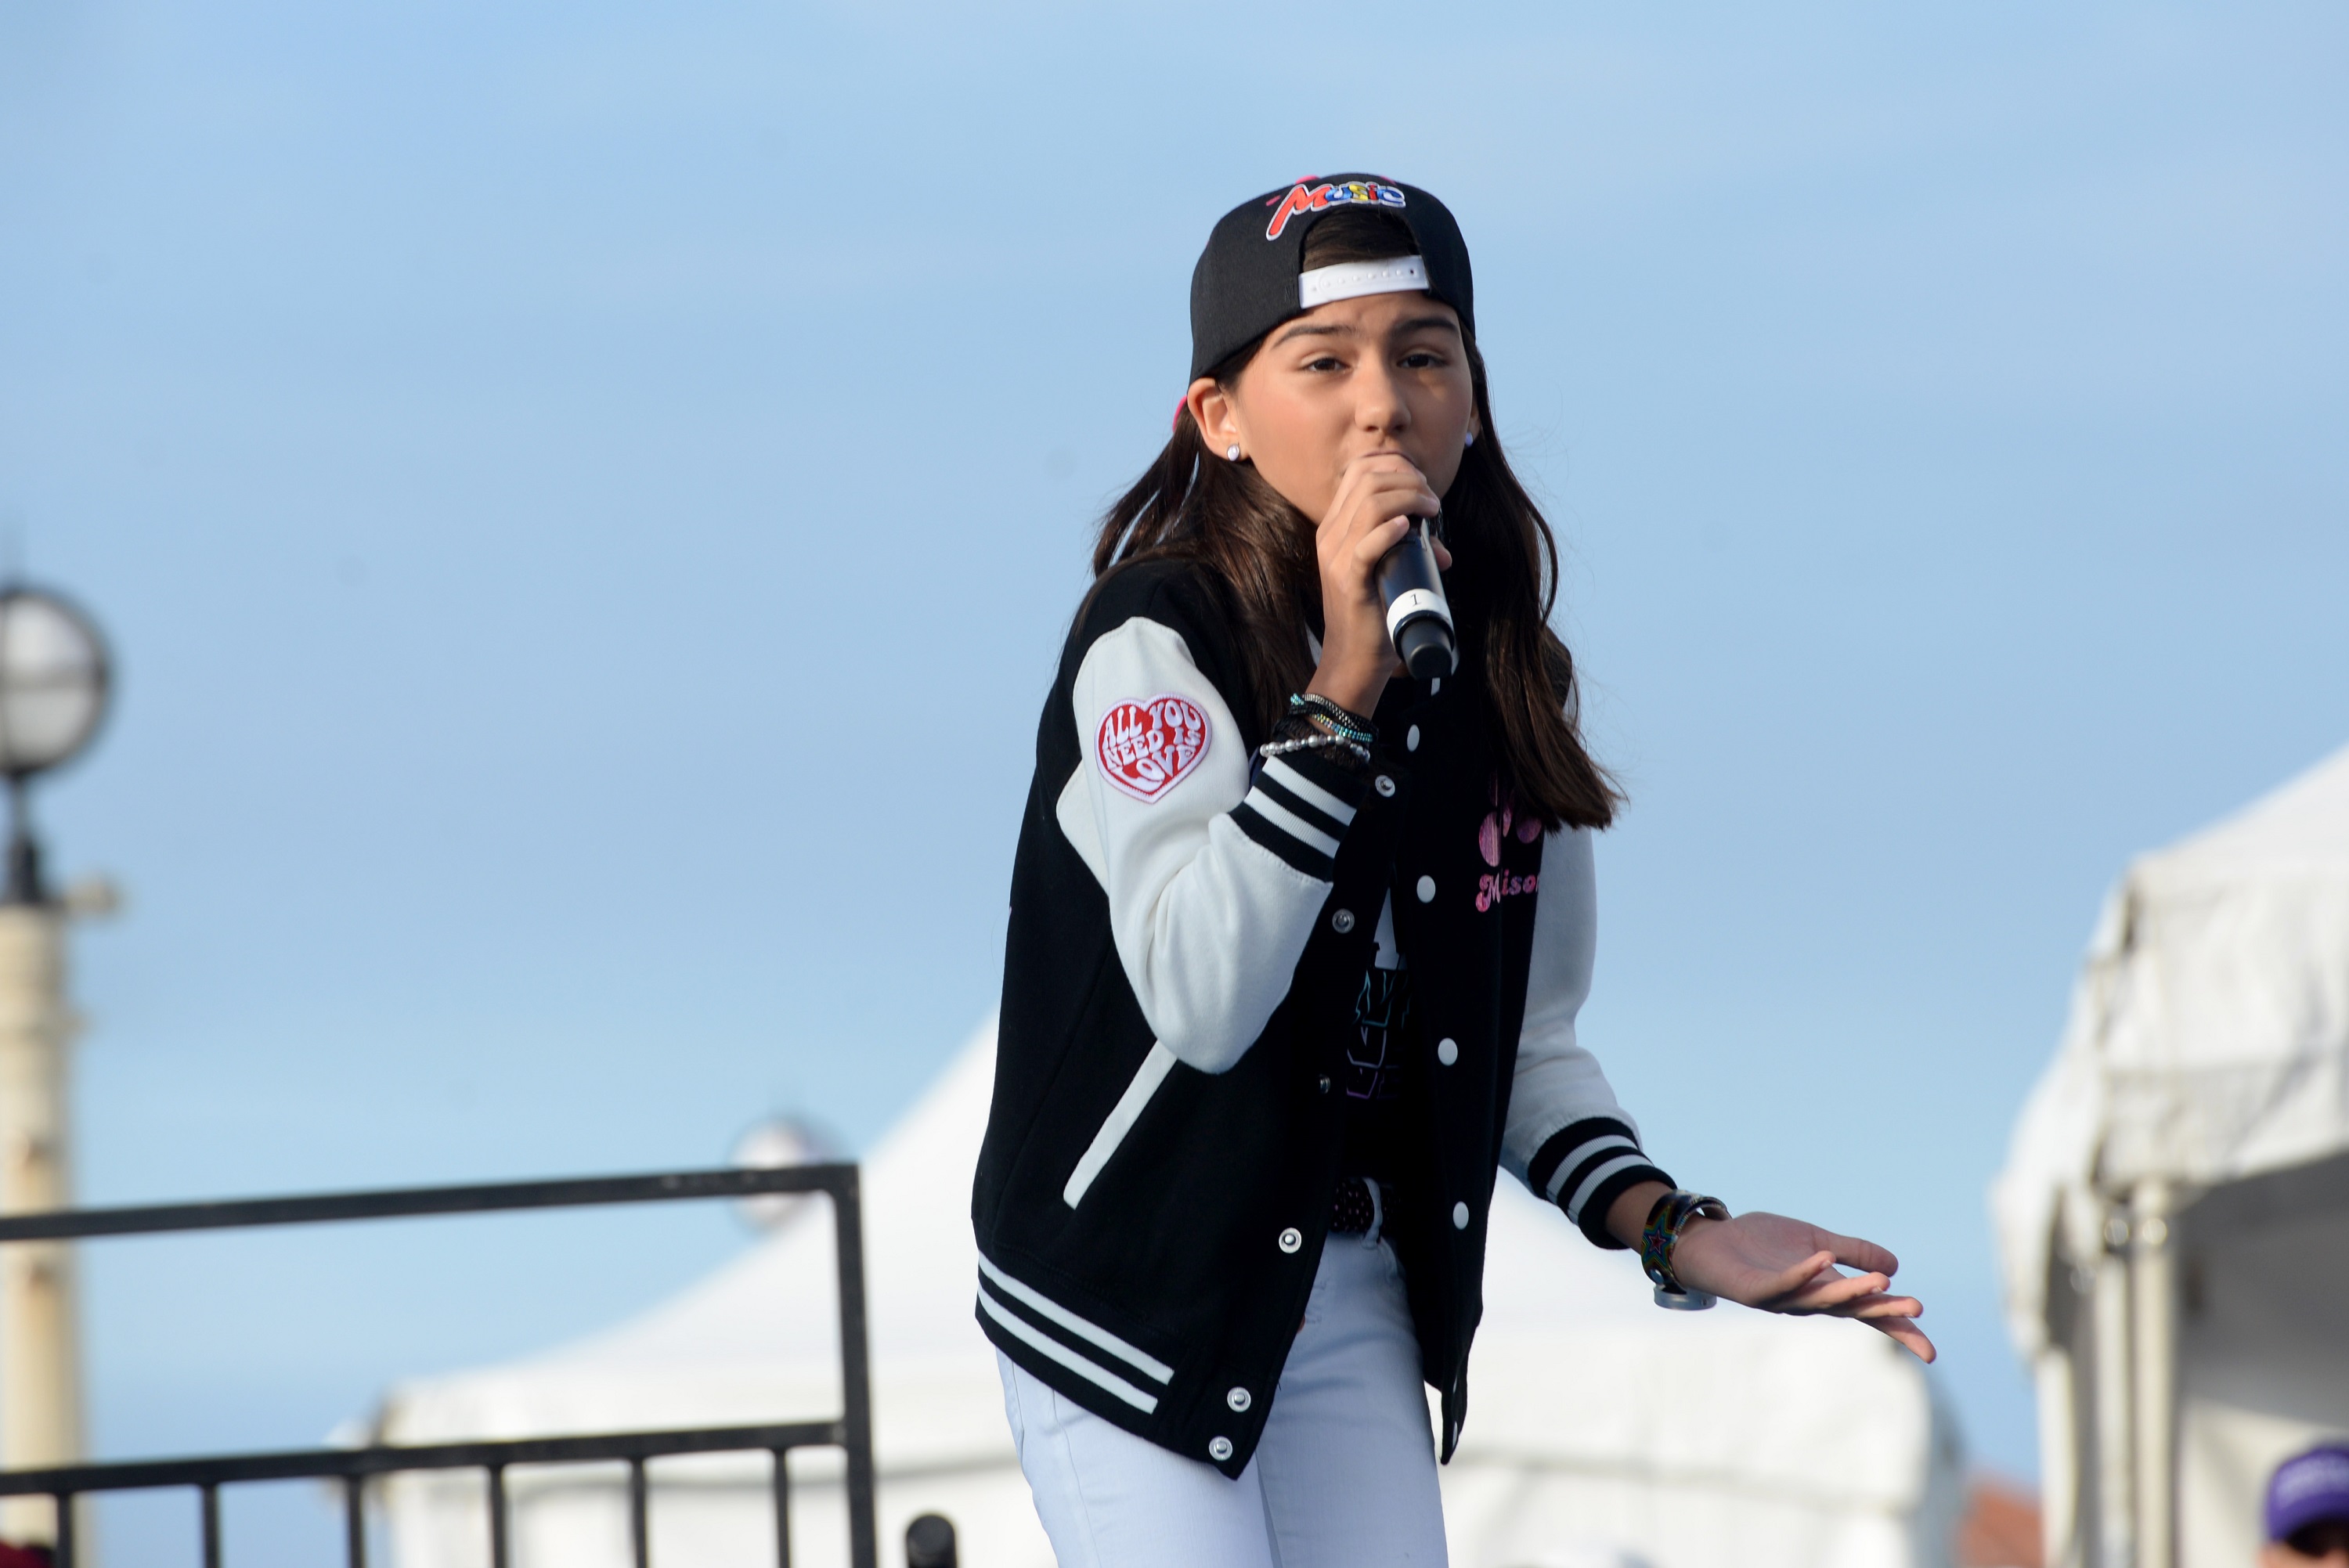 'America's Got Talent' contestant Madison Baez at the 13th annual Skechers Pier to Pier Friendship Walk